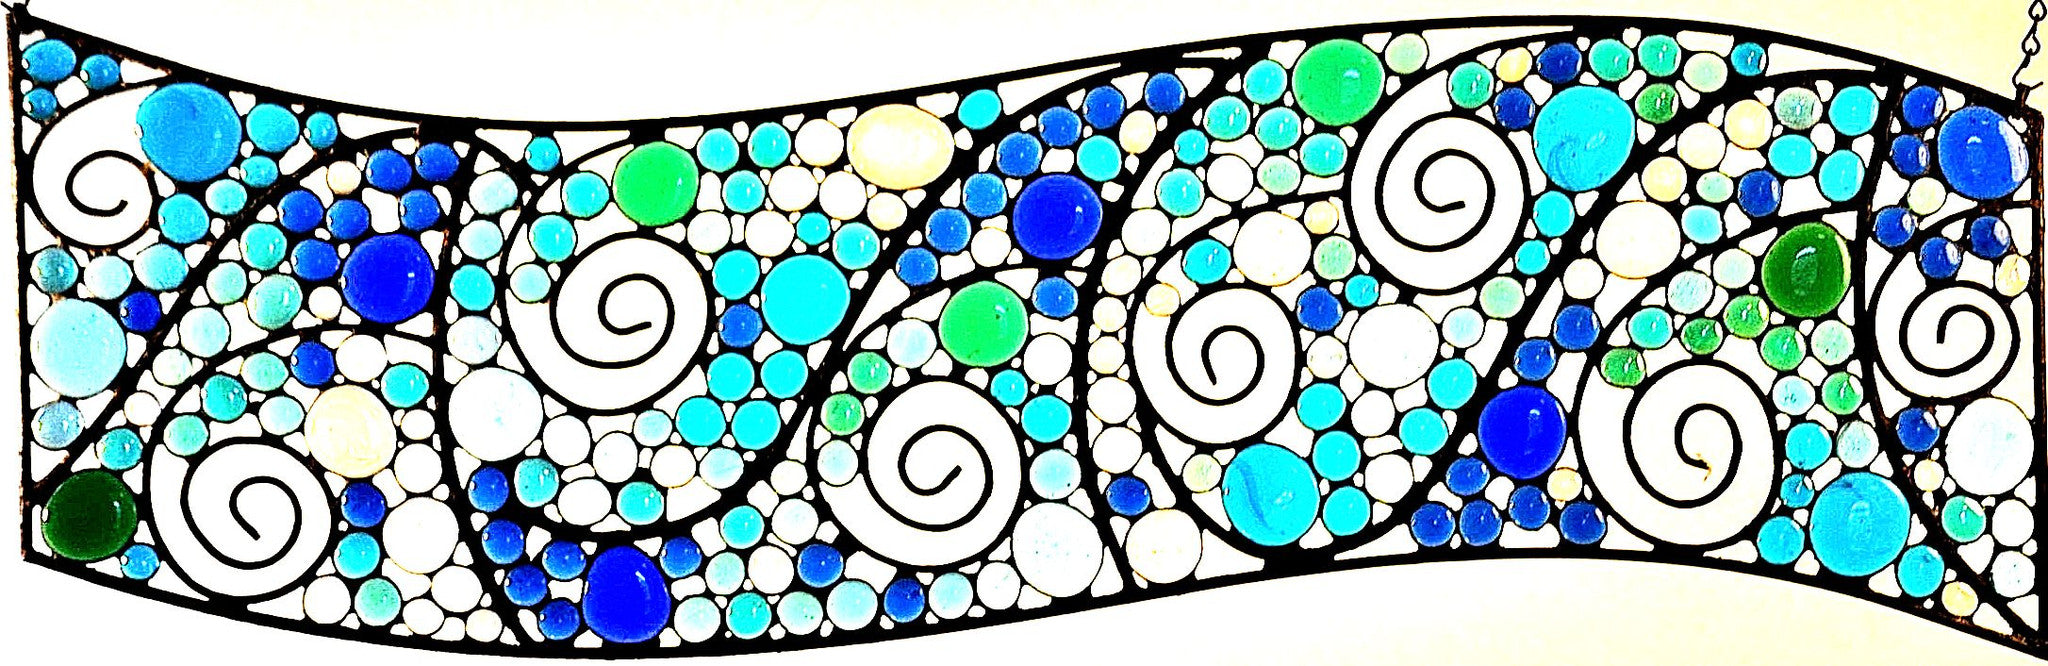 Large Stained Glass Transom.  Metal and Glass Art.  Teal, Blue, Clear, Green Nuggets.  &